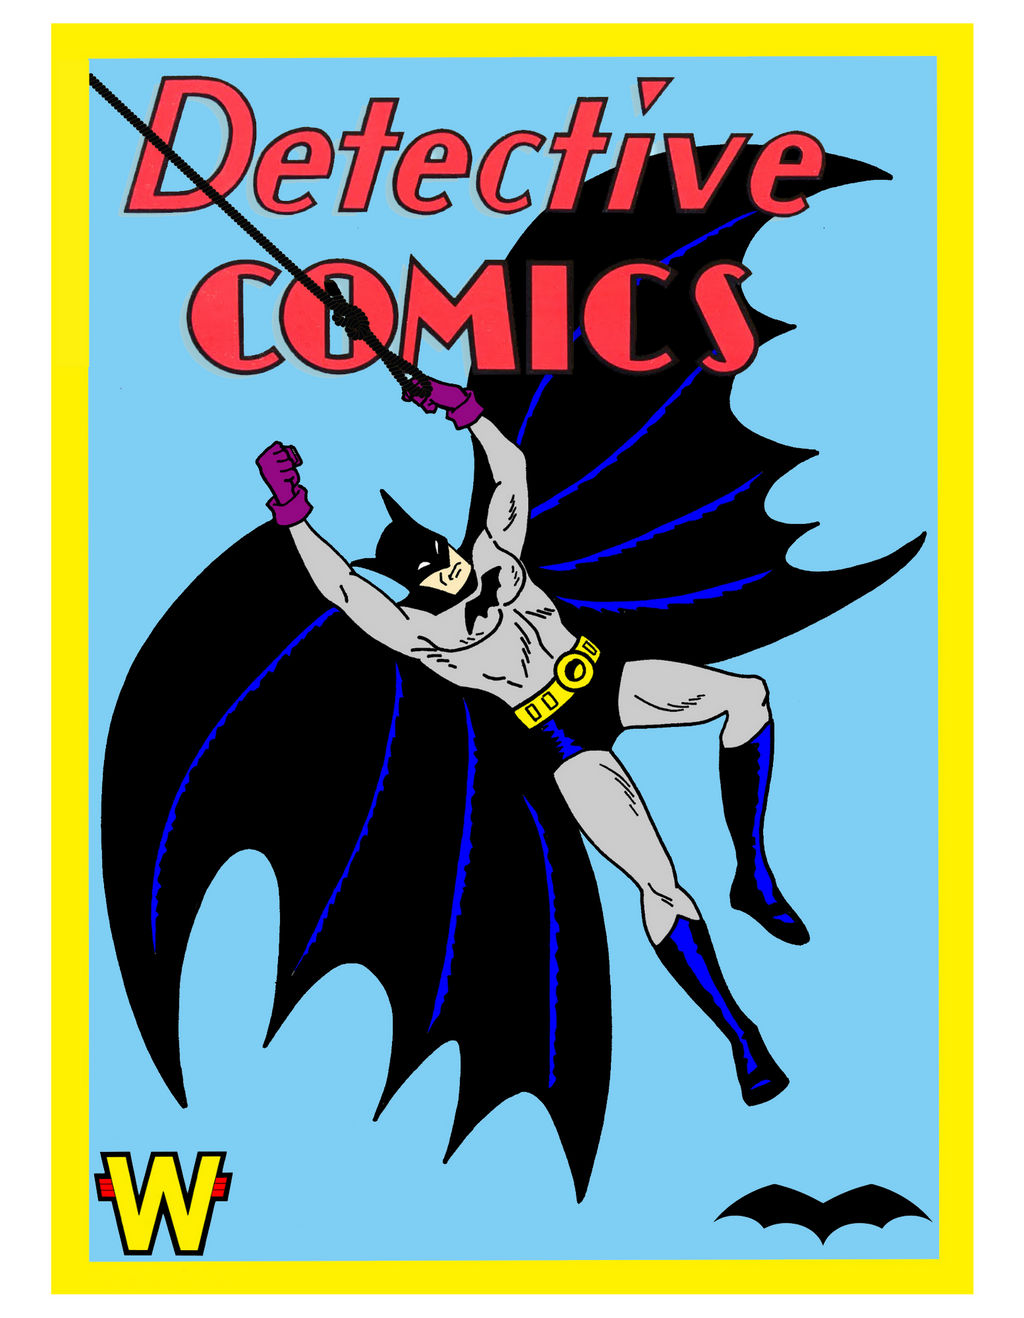 DC COMICS 1939 FIRST APPEARANCE OF BATMAN by donandron on DeviantArt